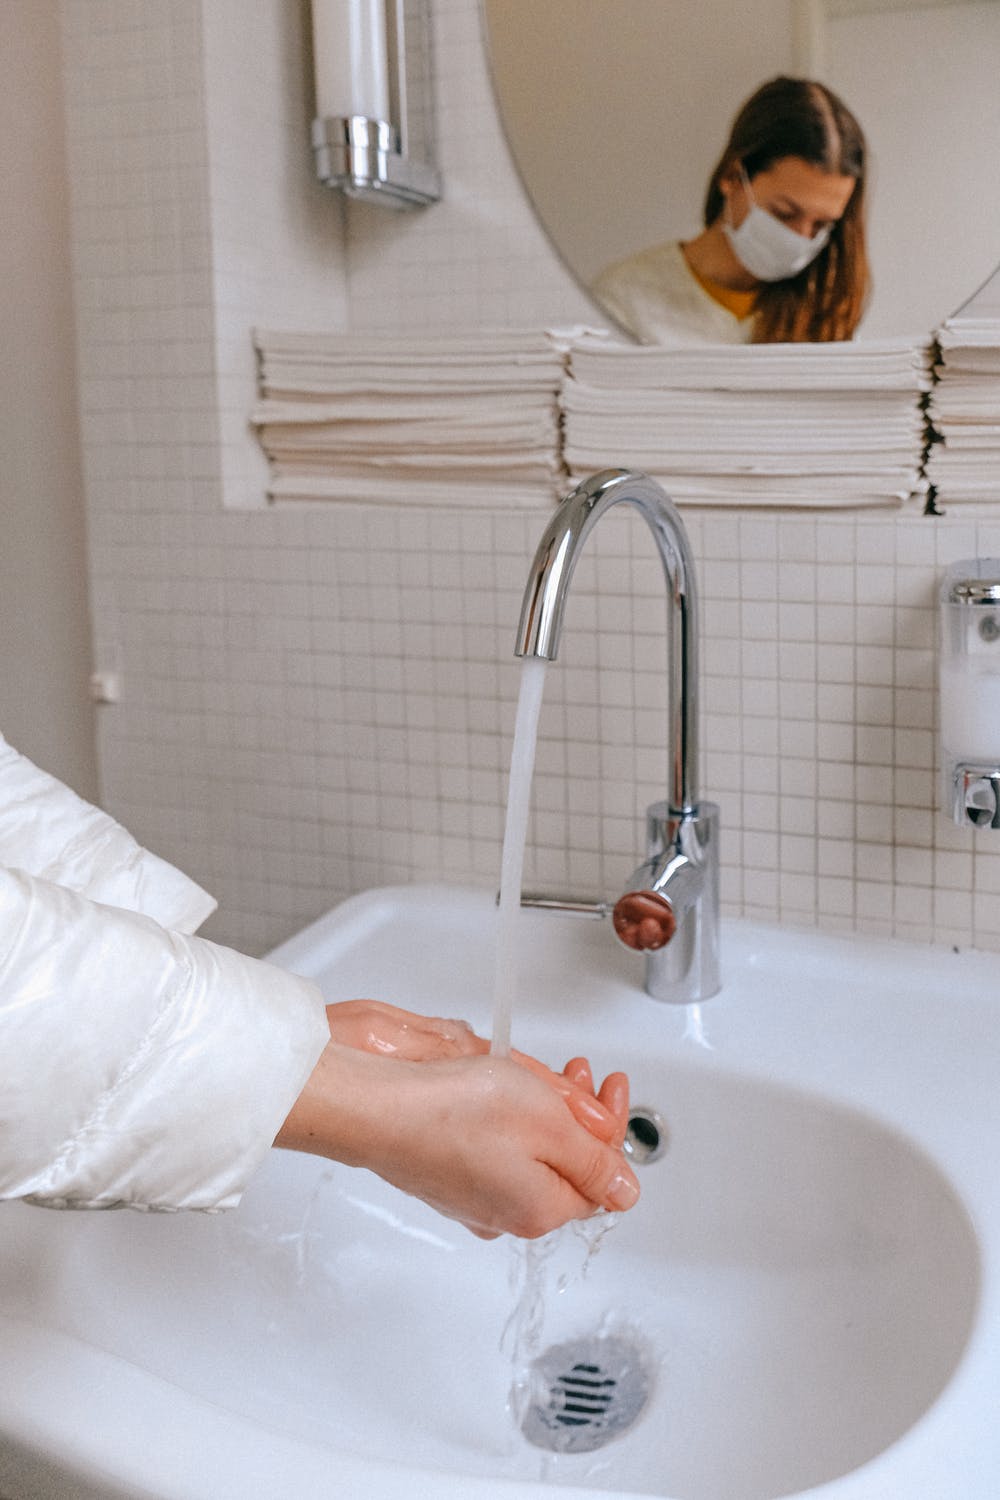 All you need to know about the bathroom faucet